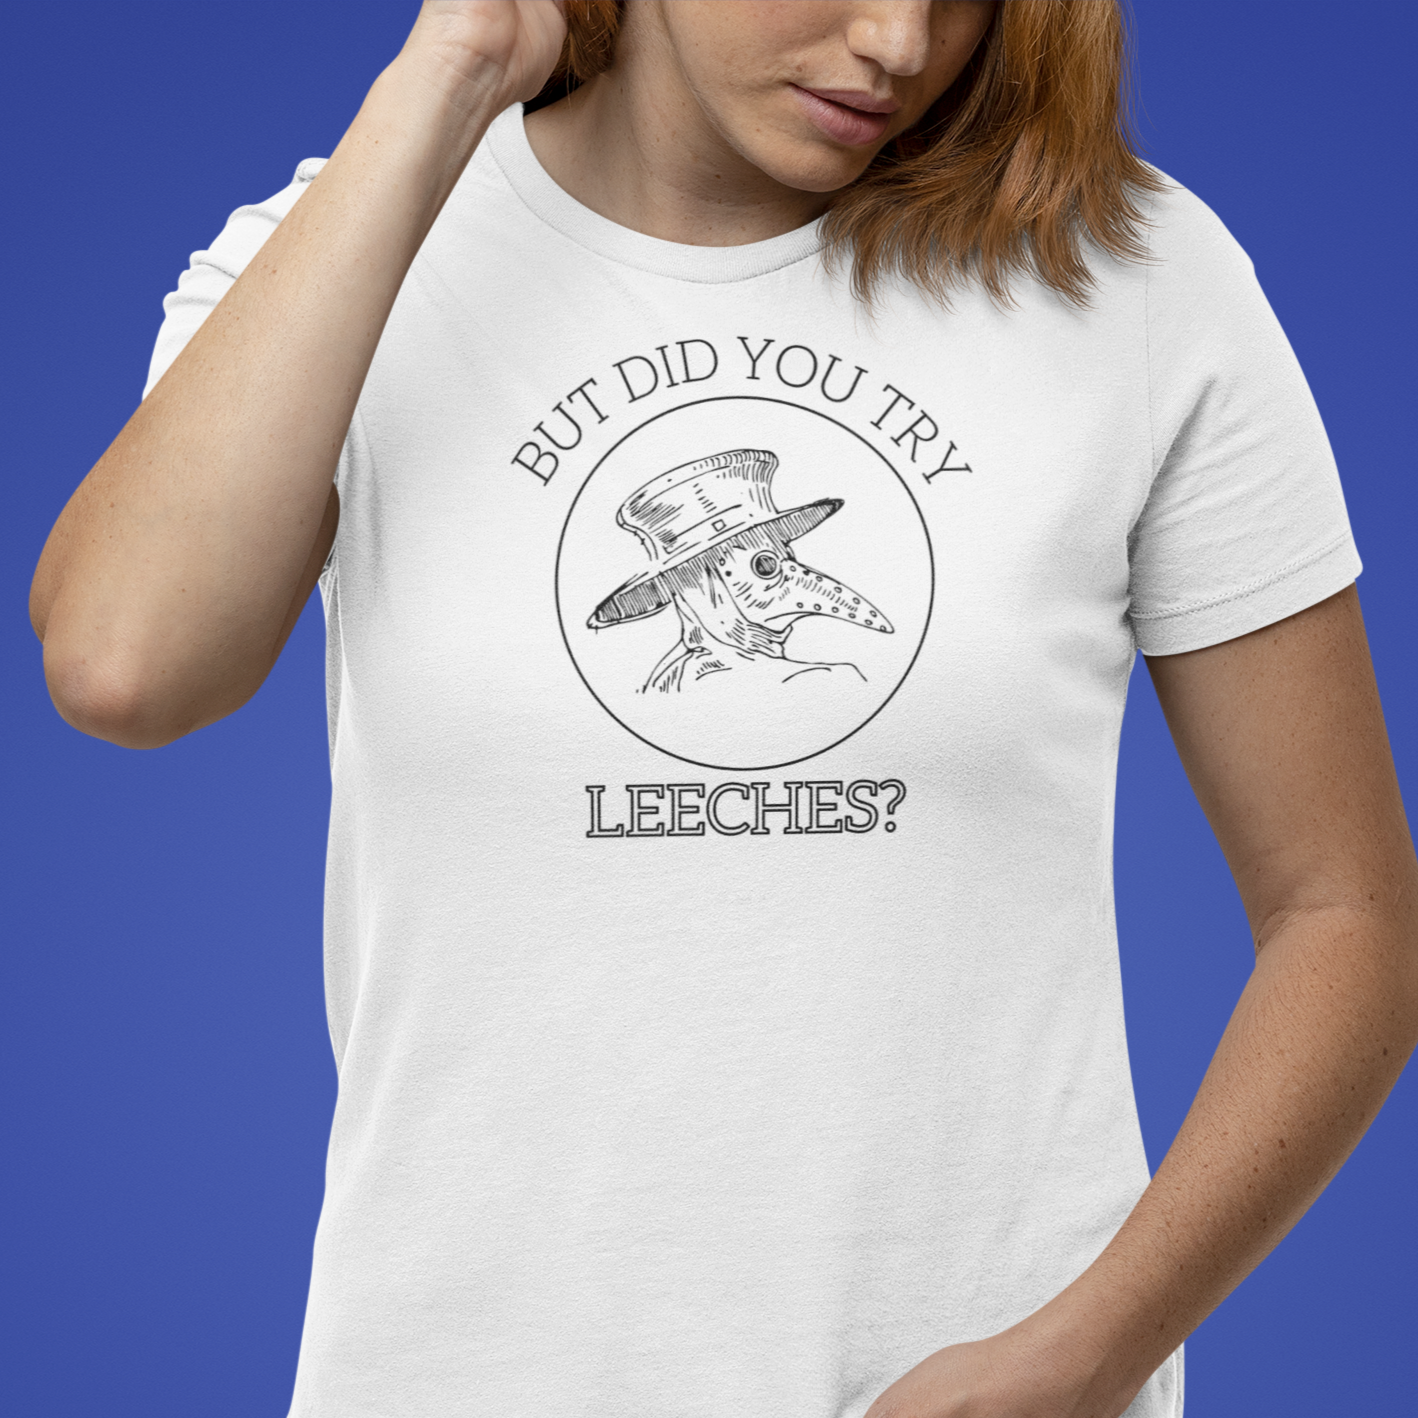 Funny Medieval Plague Doctor History Shirt But Did You Try Leeches Dark Humor Gift